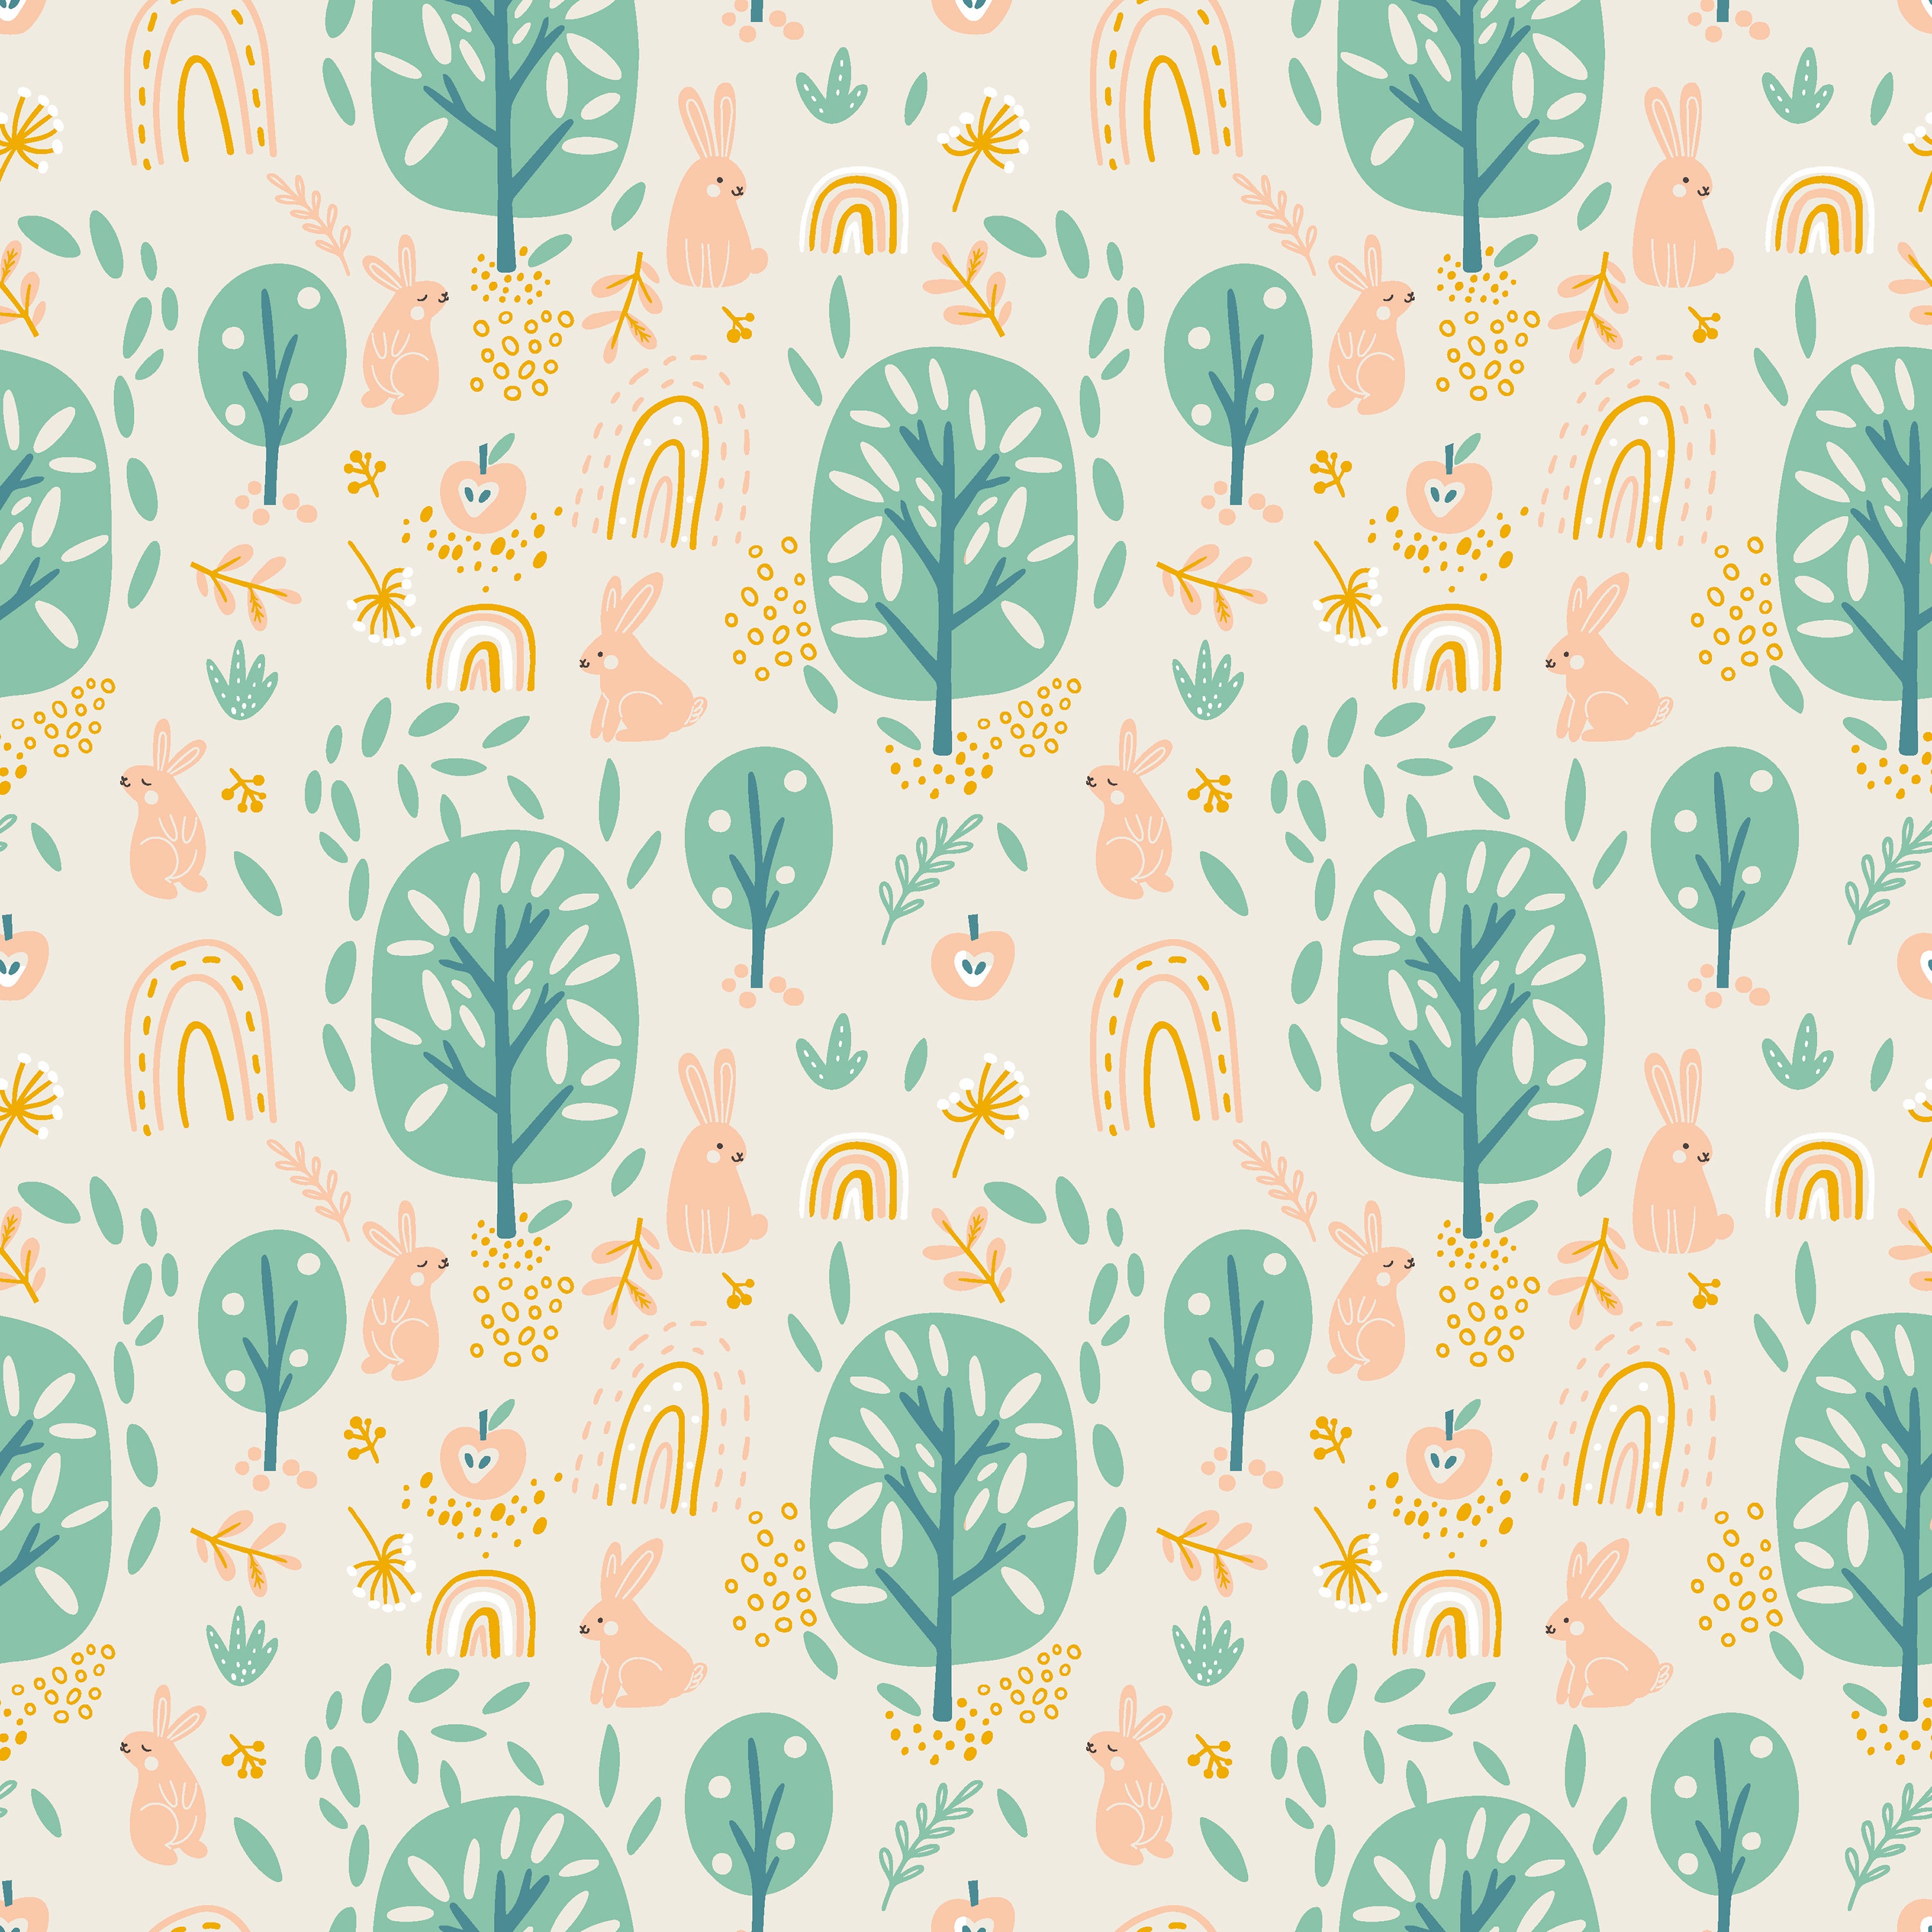 Seamless pattern of playful rabbits, trees, and small rainbows on a pale peach background, interspersed with flowers and leaves, ideal for a serene and engaging children's room decor.